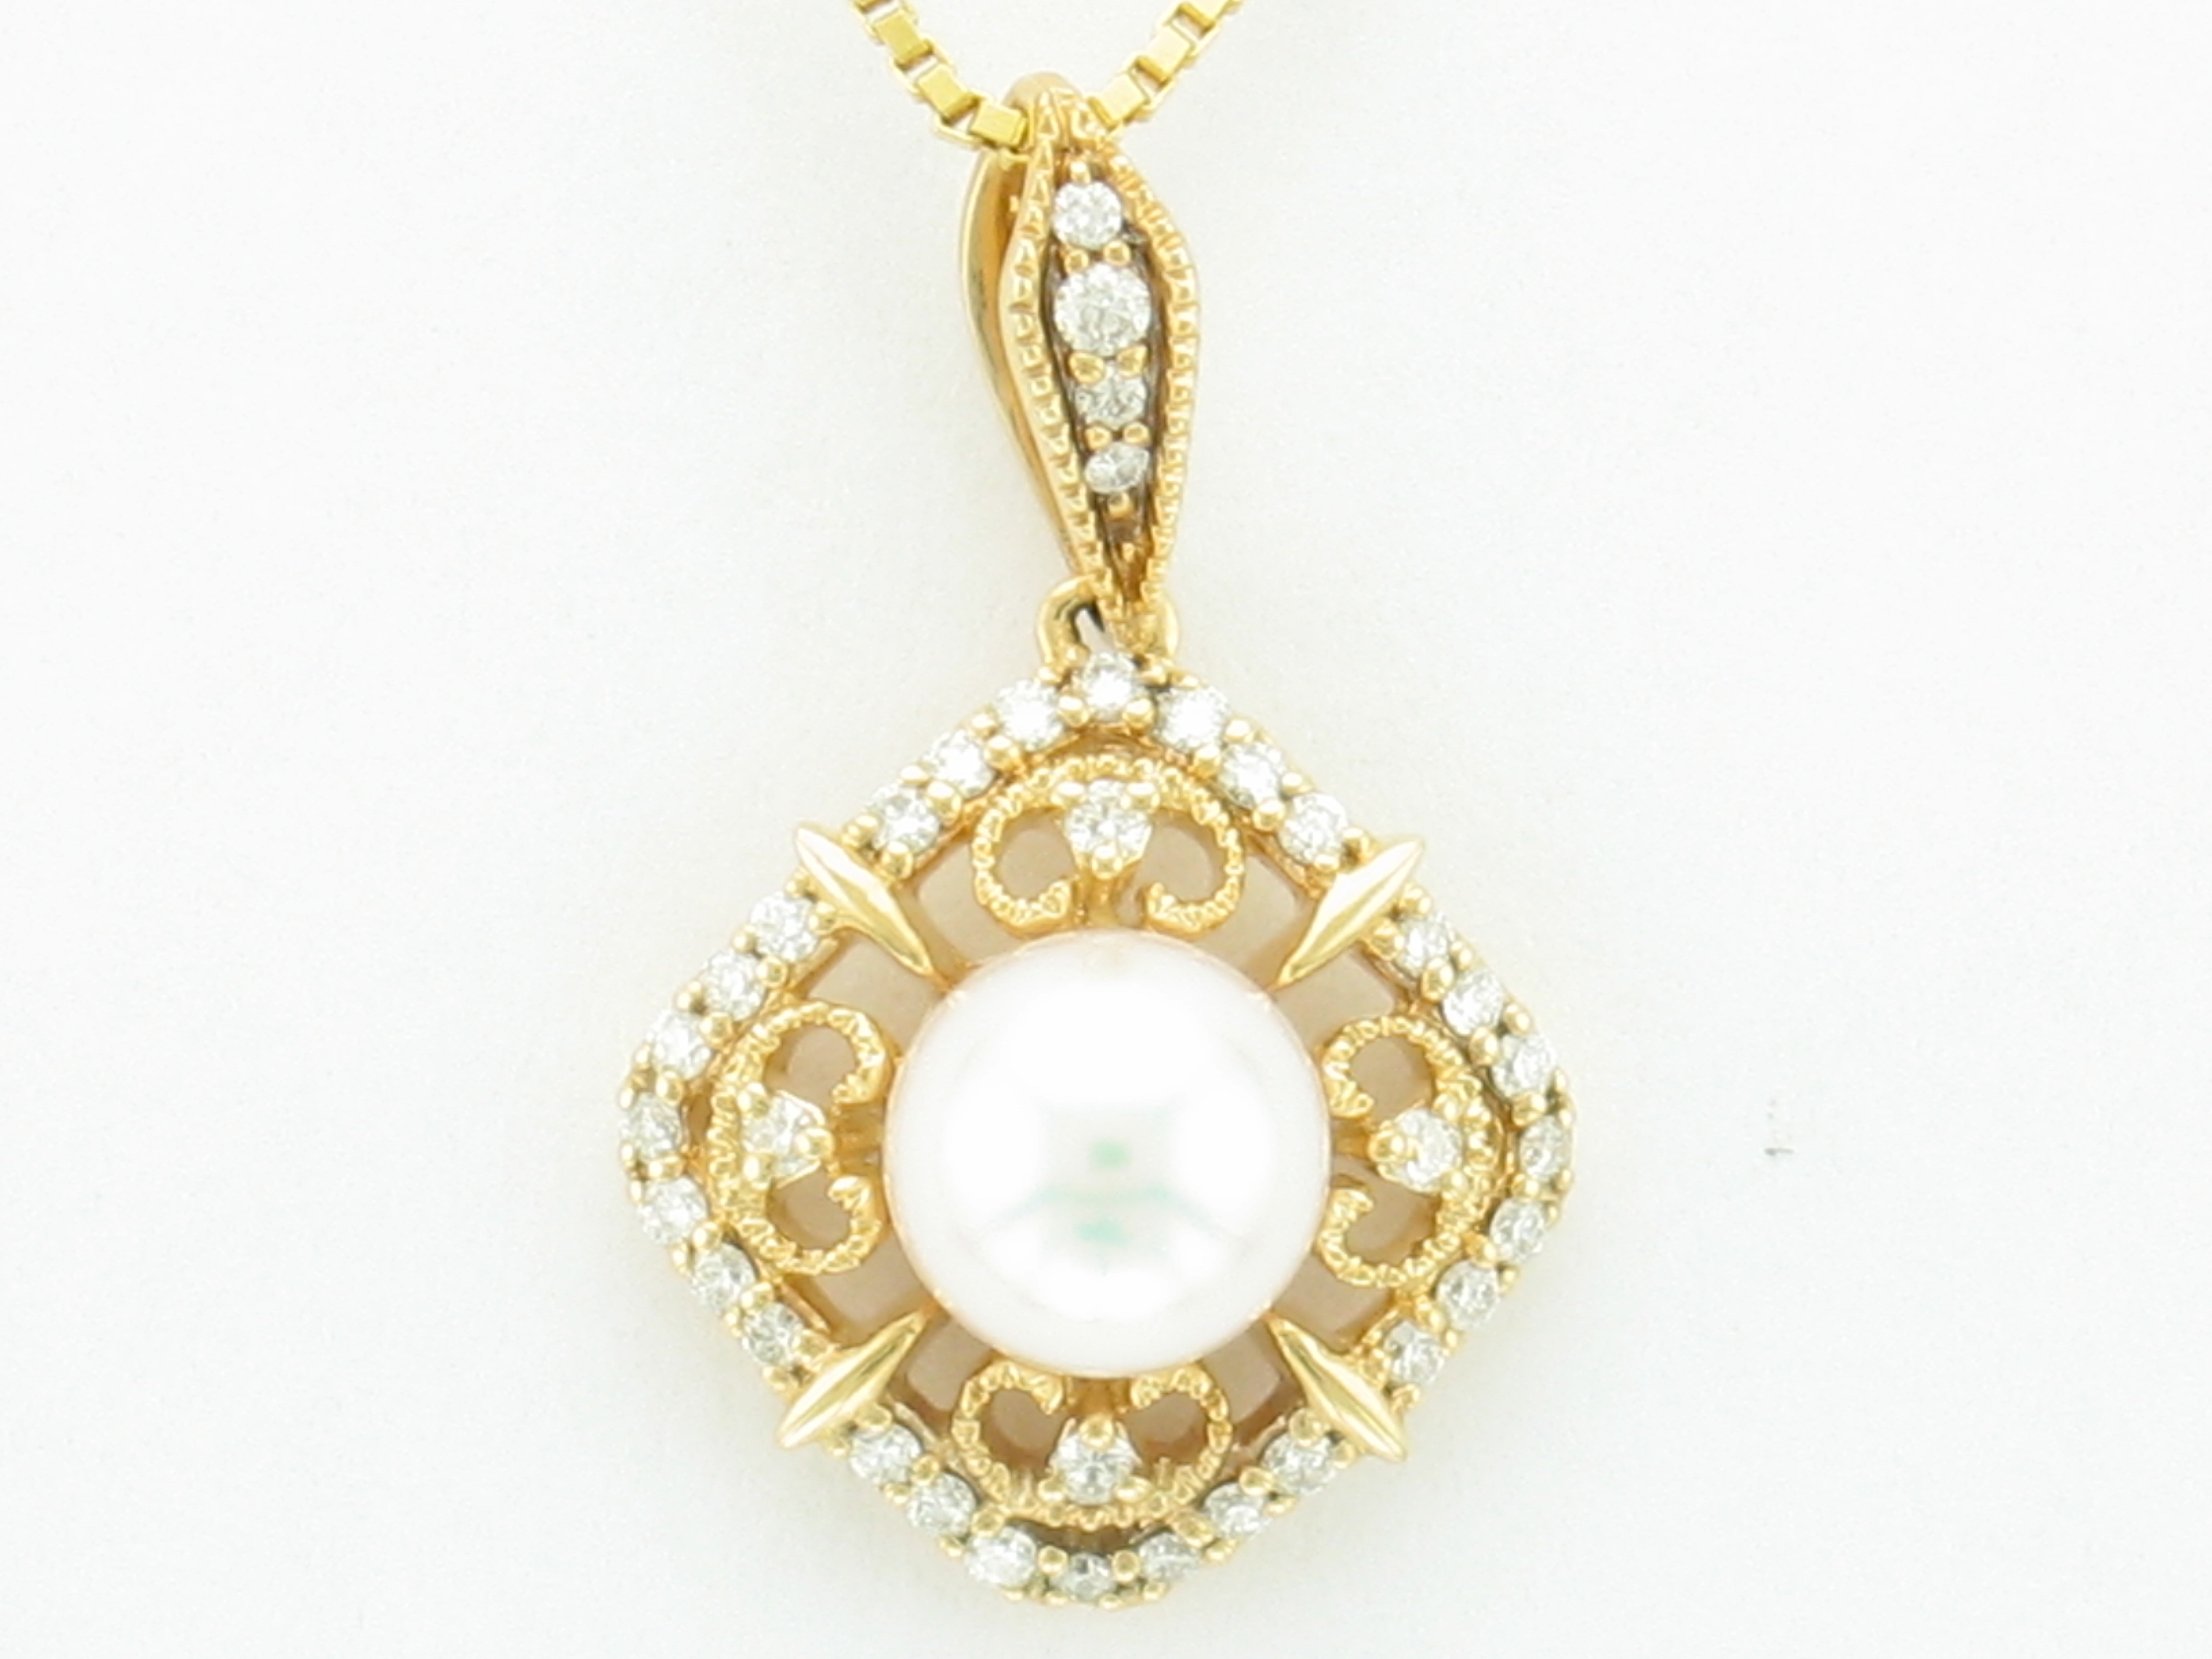 Pendant by Imperial-Deltah, Inc.